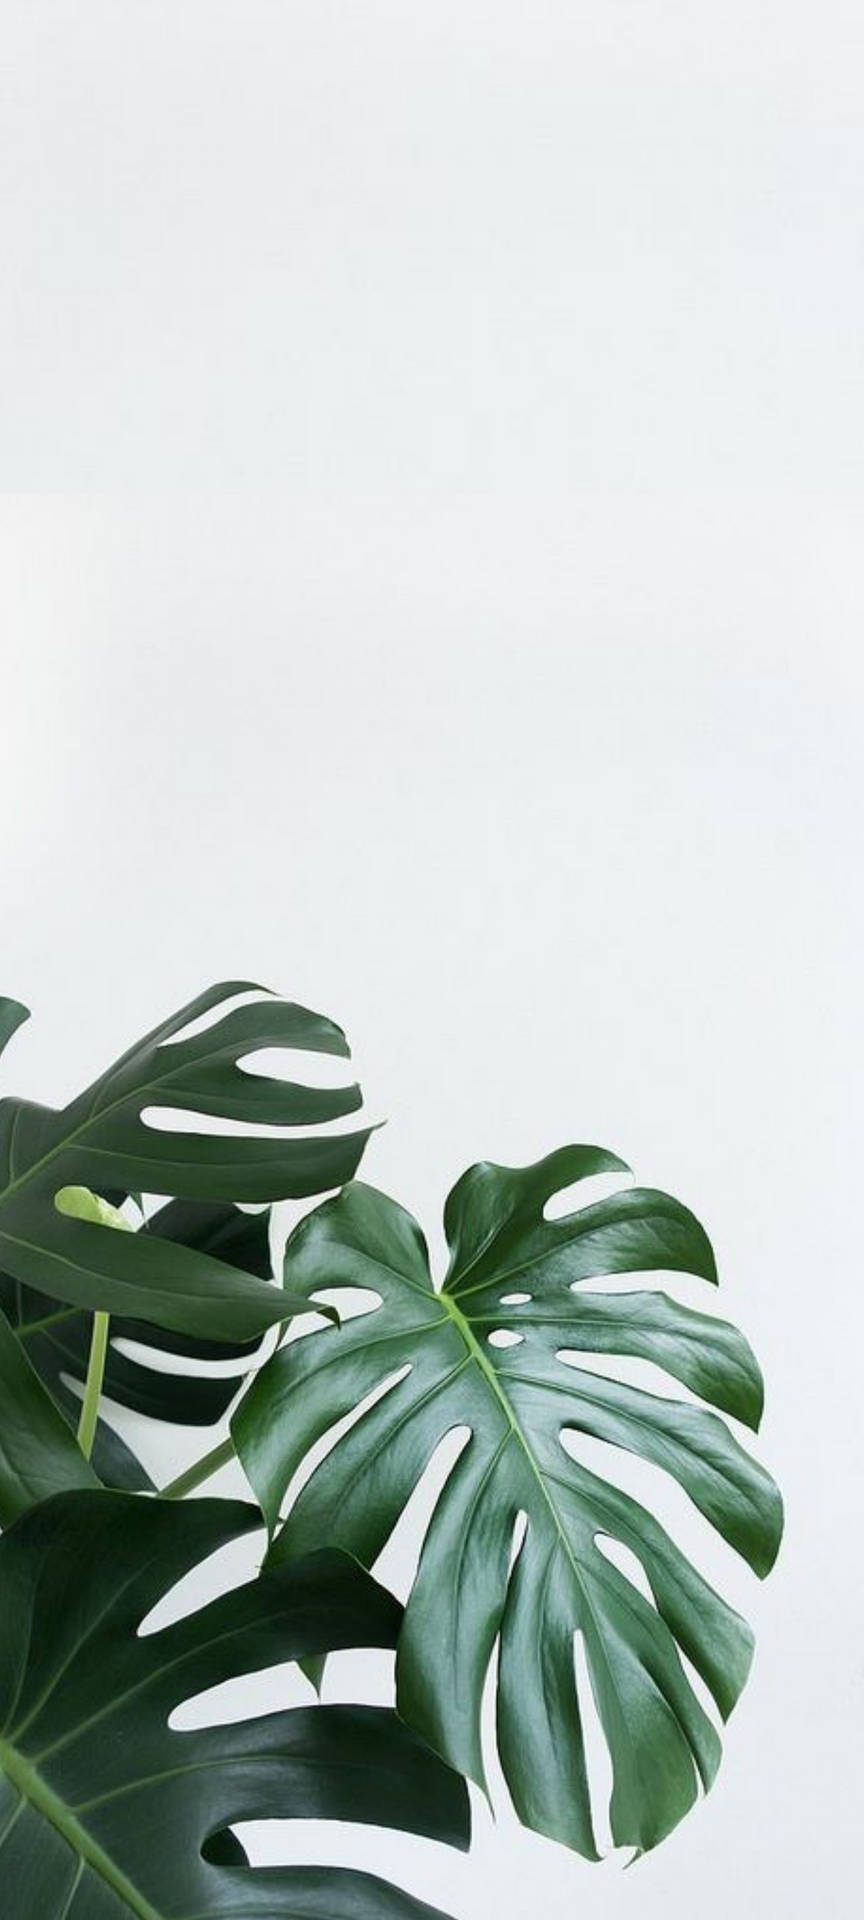 Monstera Leaves Iphone Background